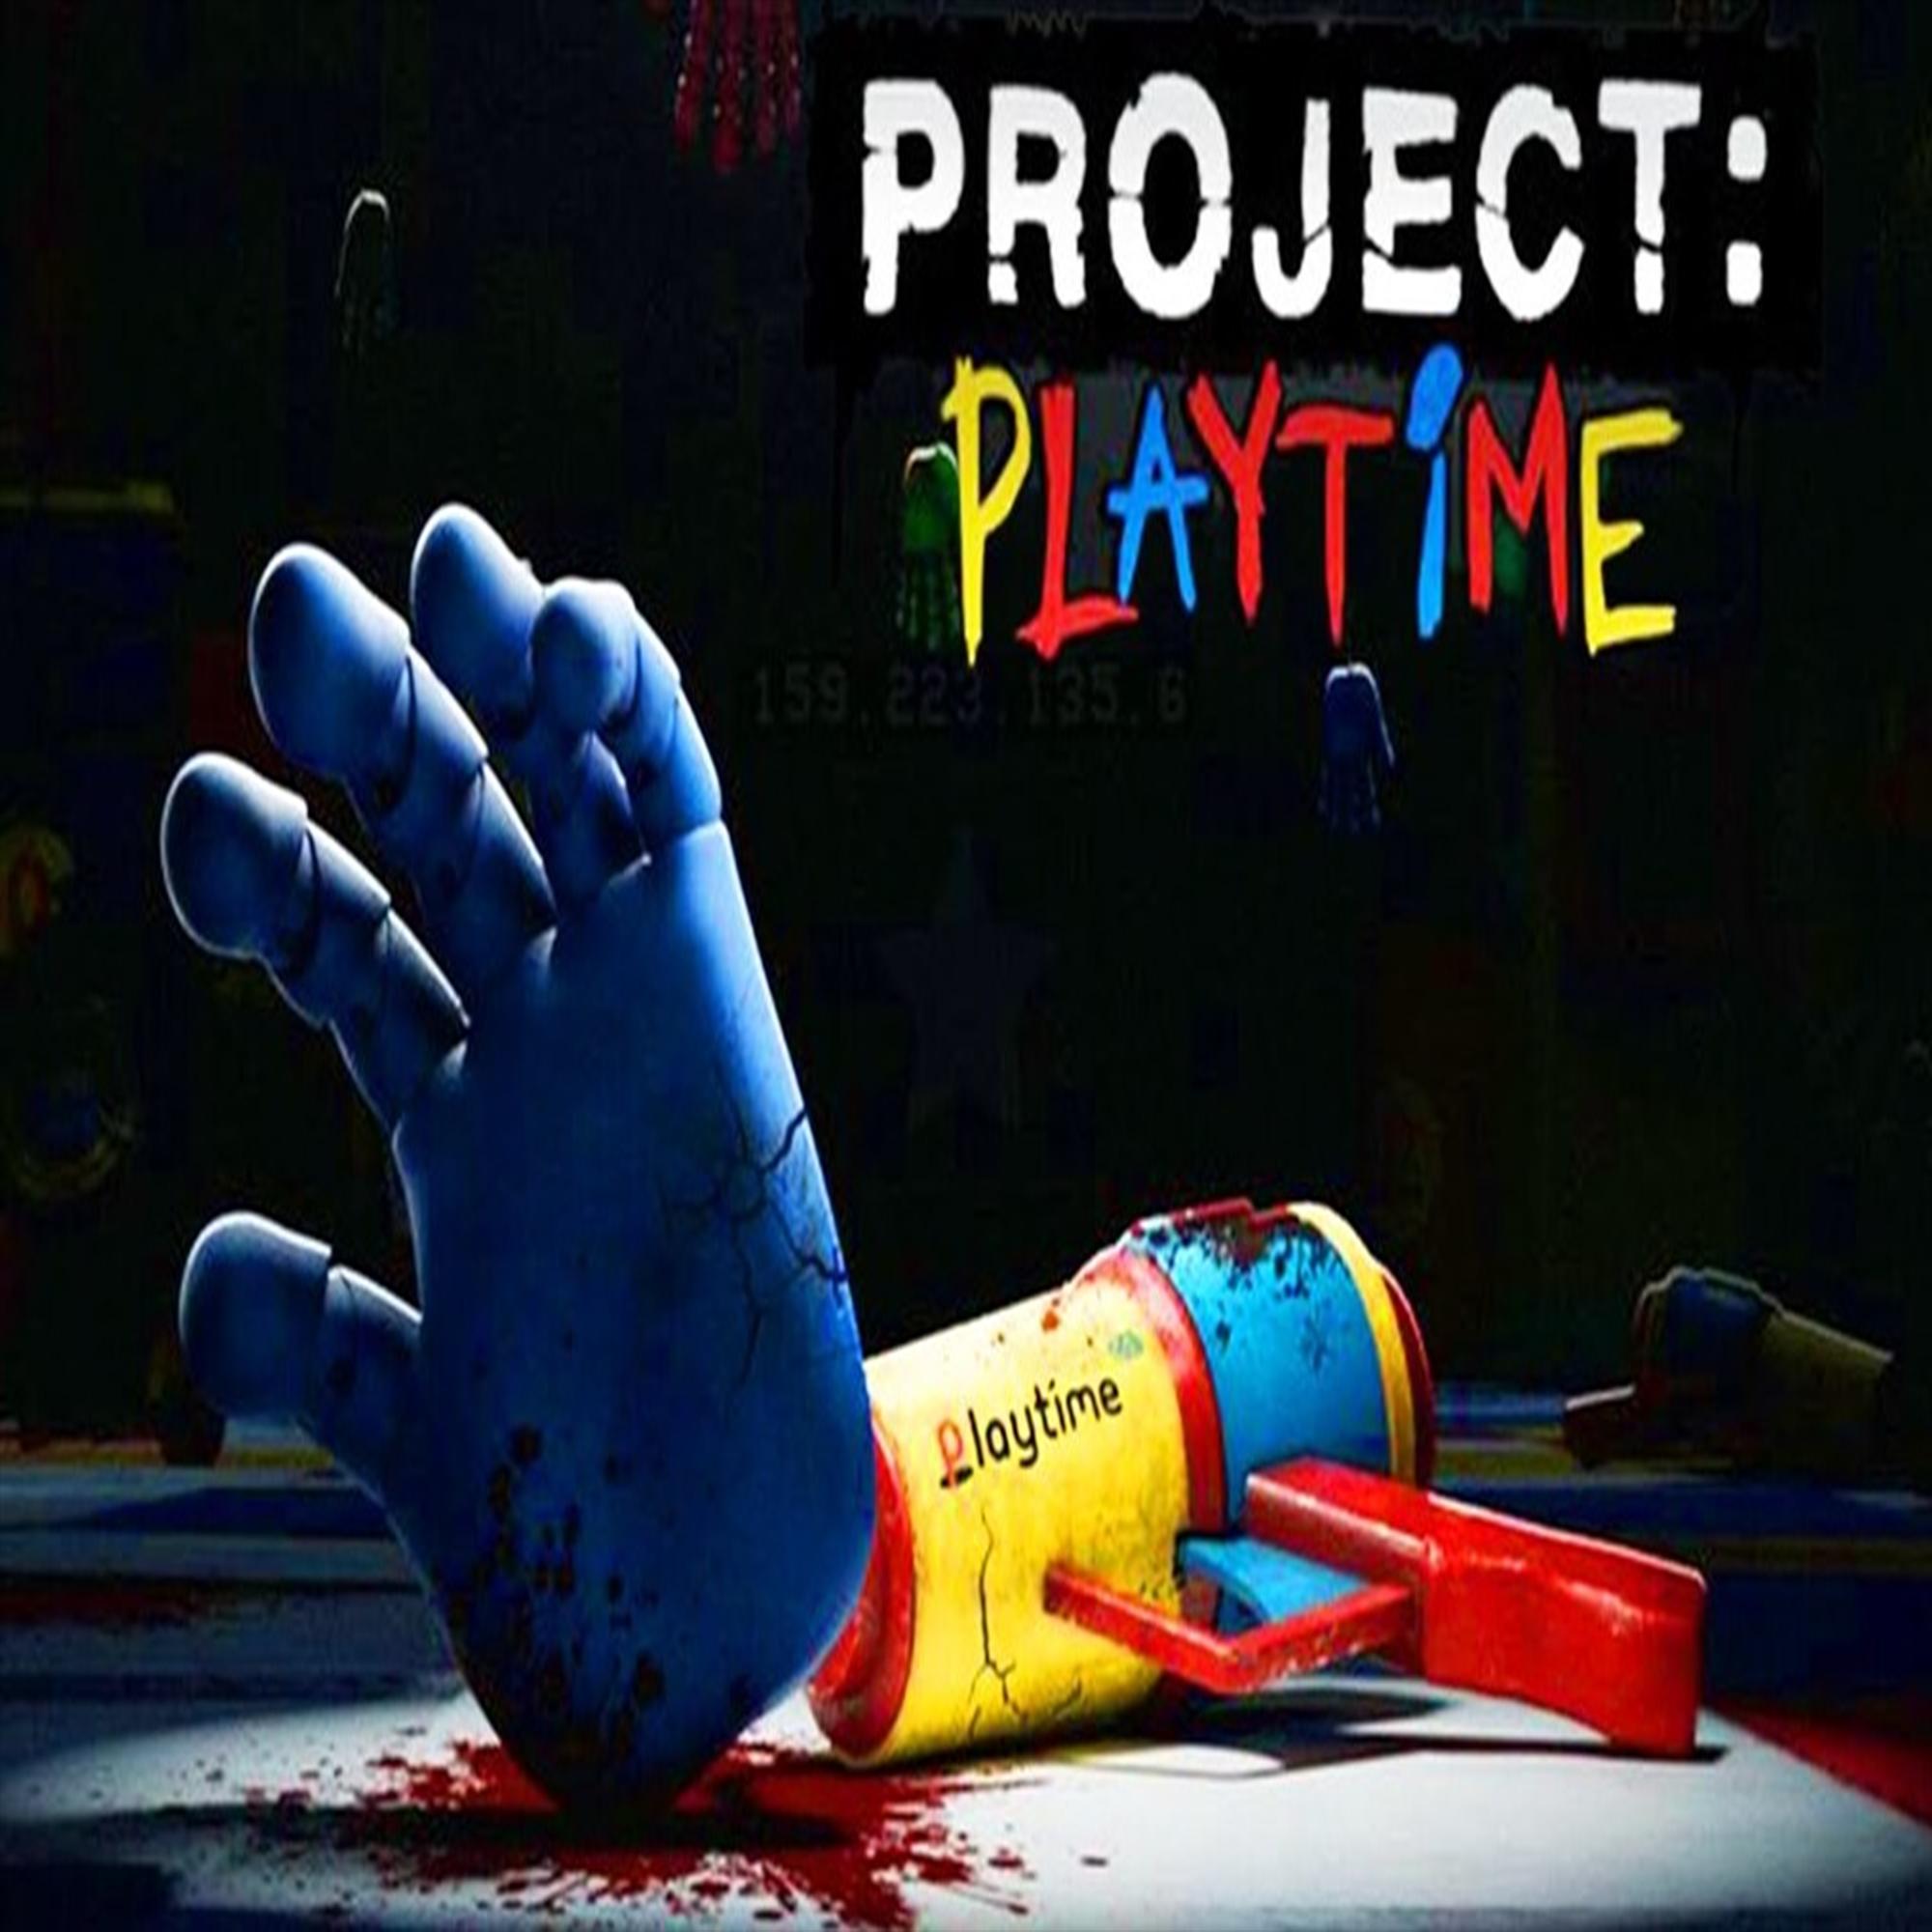 Project playtime download